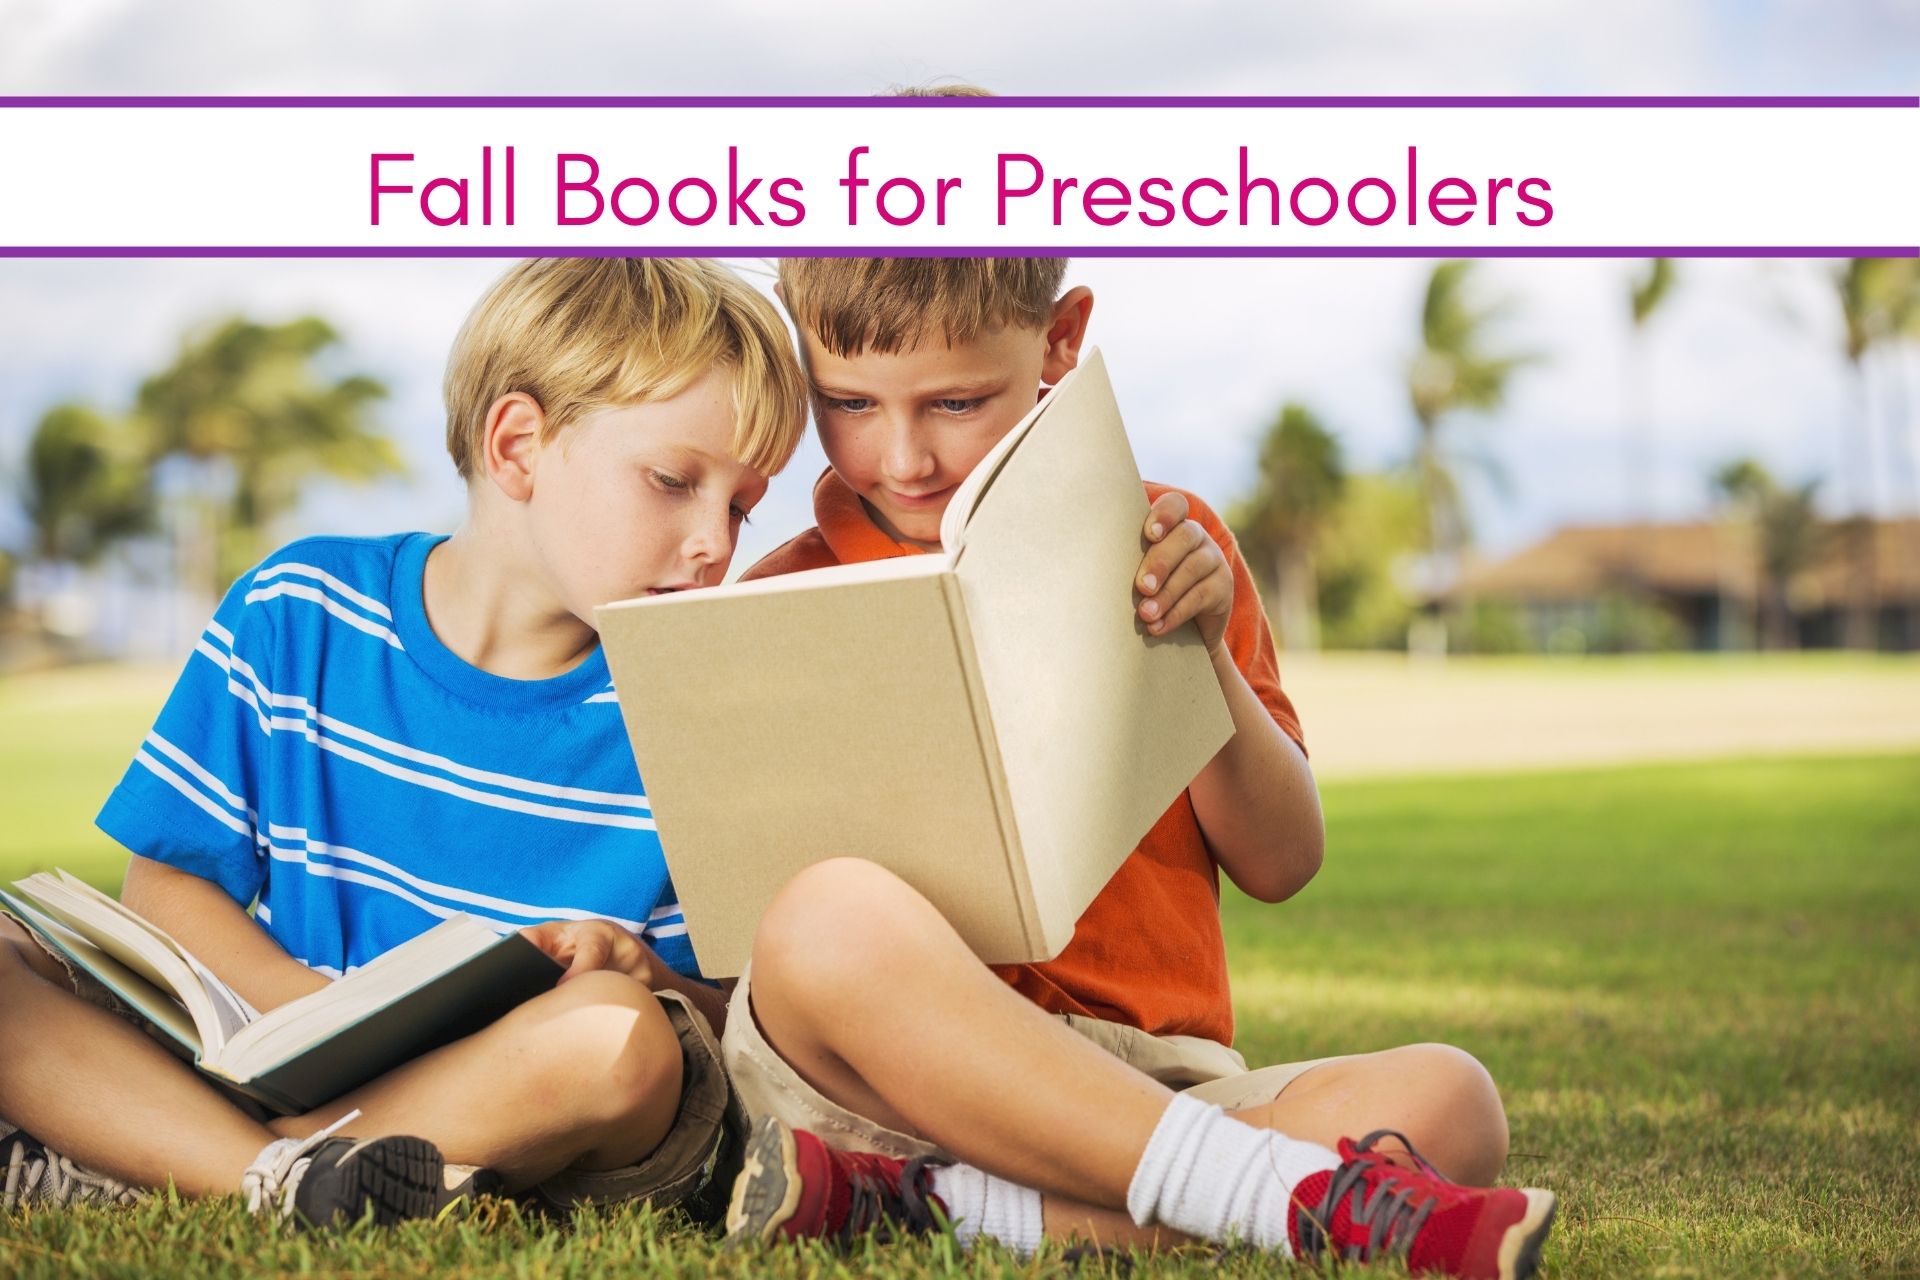 Feature: boys reading fall books for preschoolers